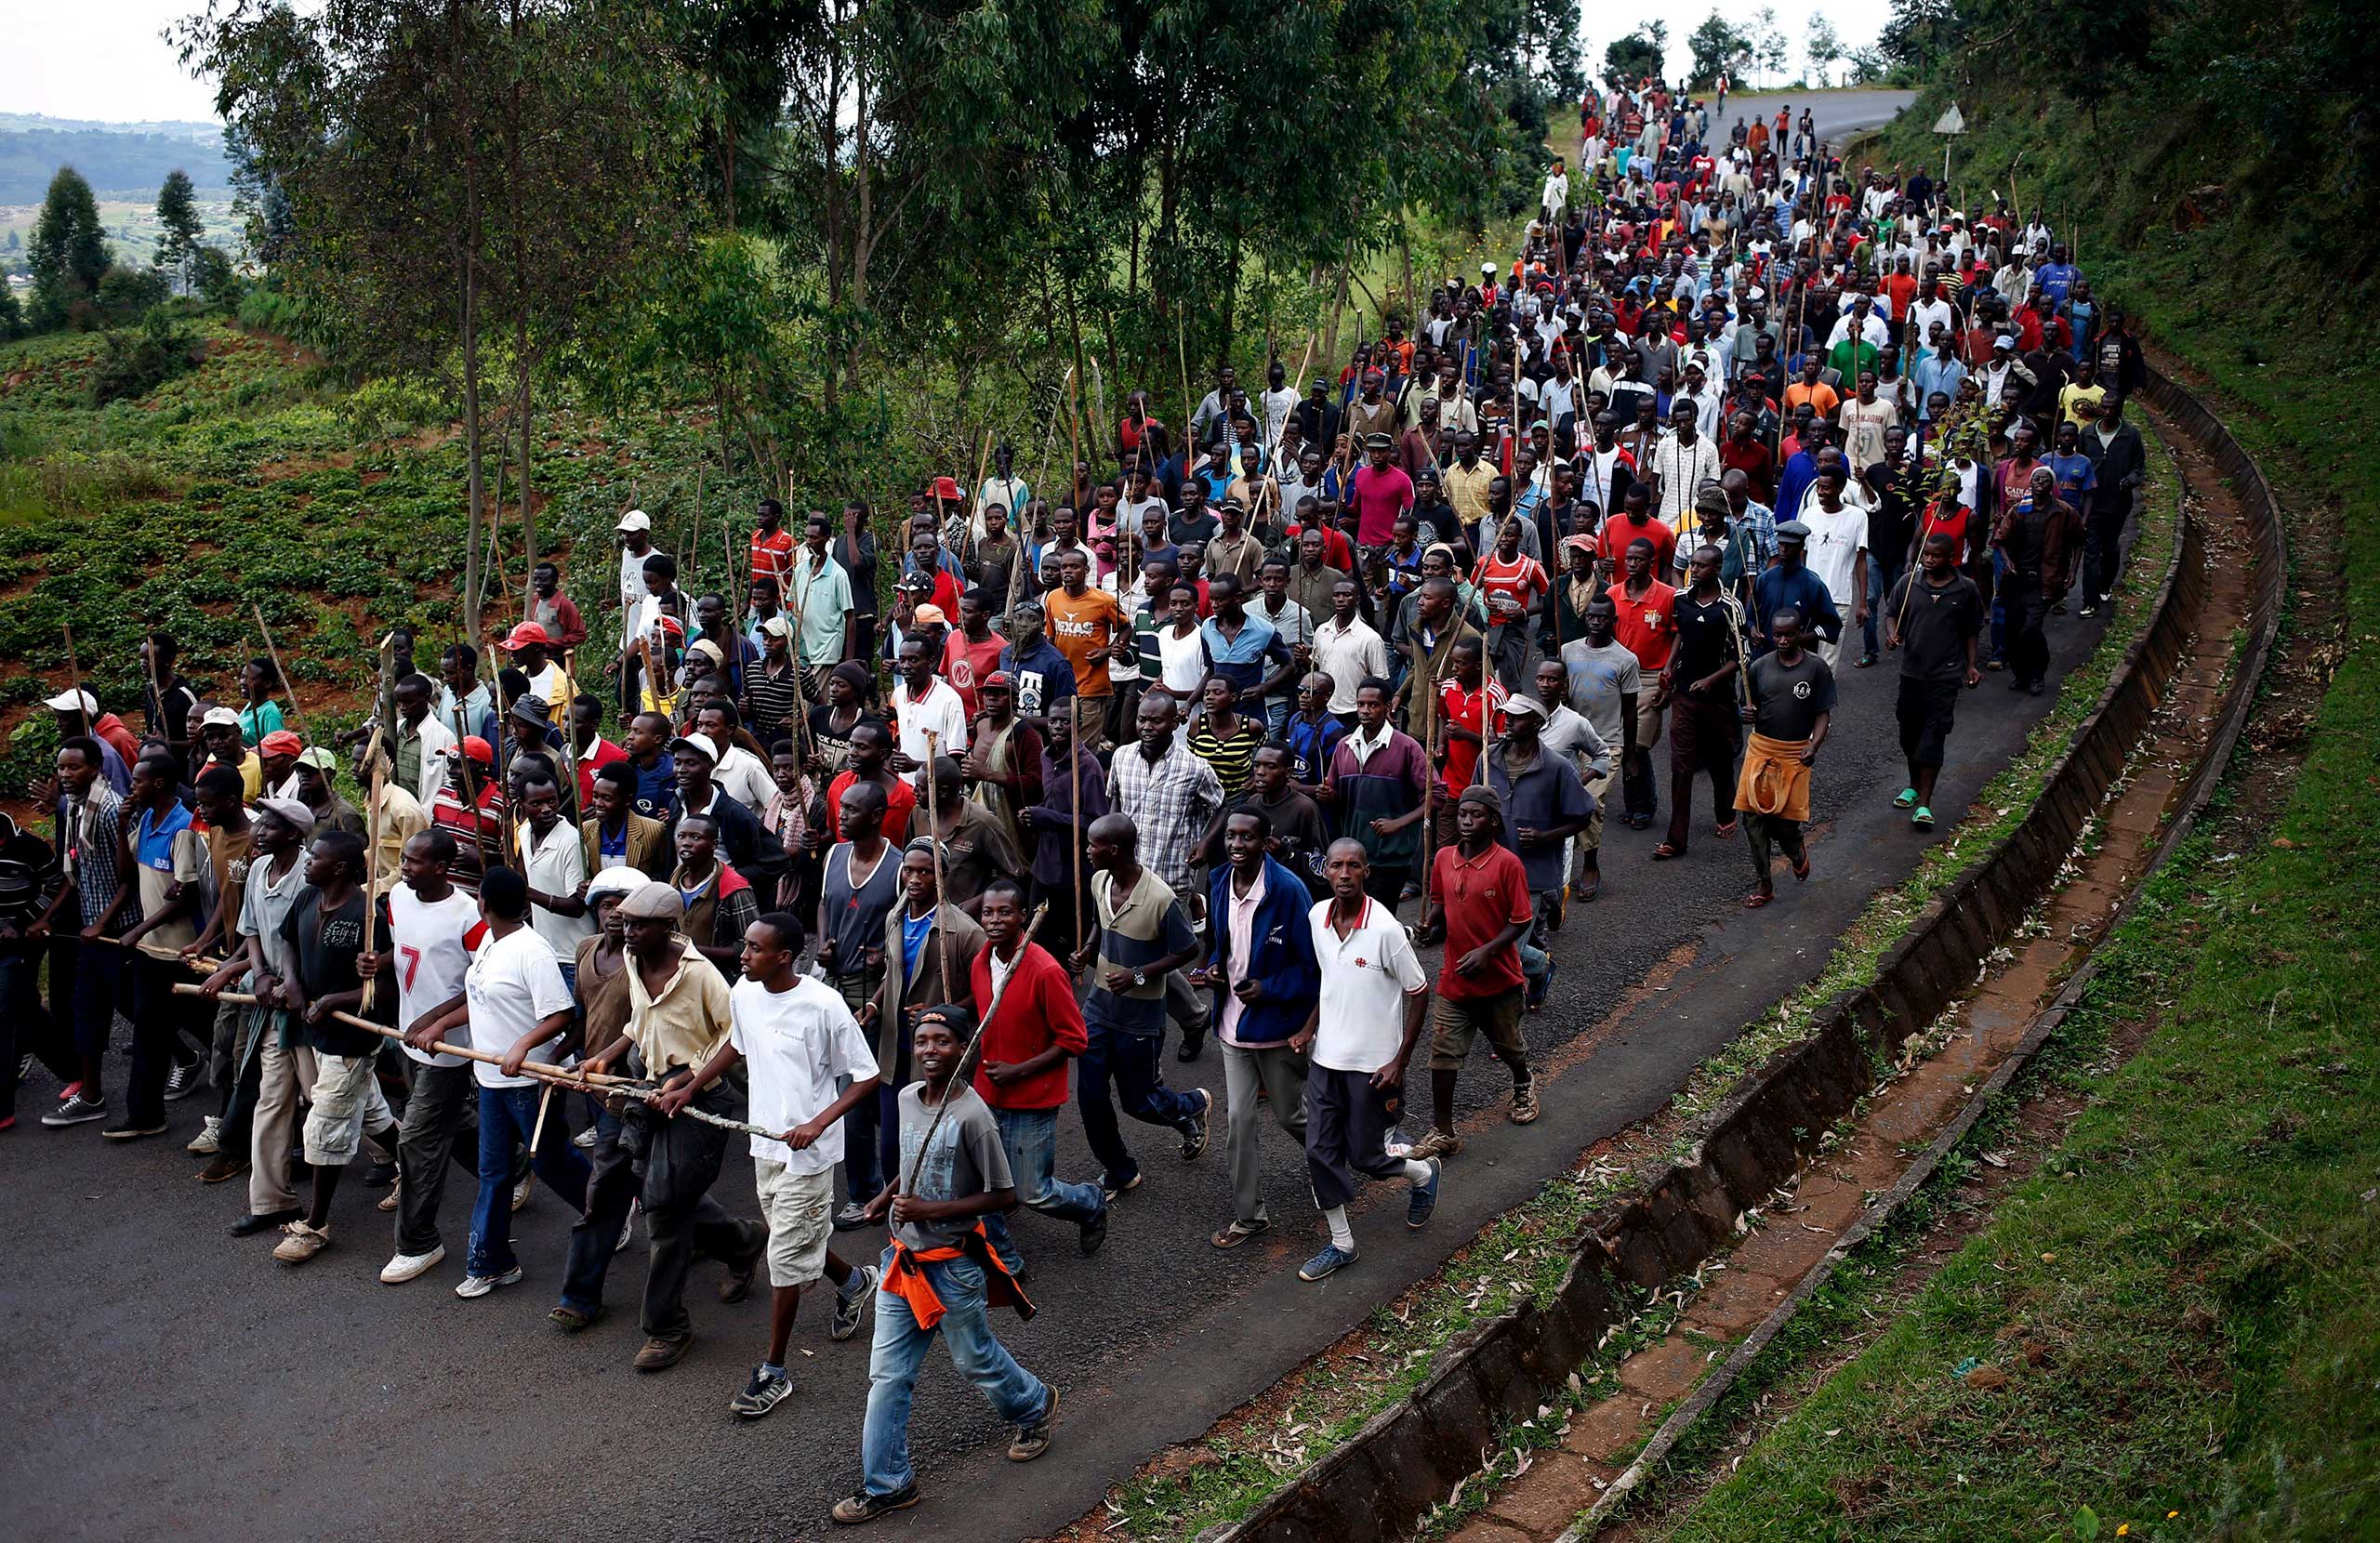 Protesters who are against Burundi President Pierre Nkurunziza and his bid for a third term march towards the town of Ijenda, Burundi